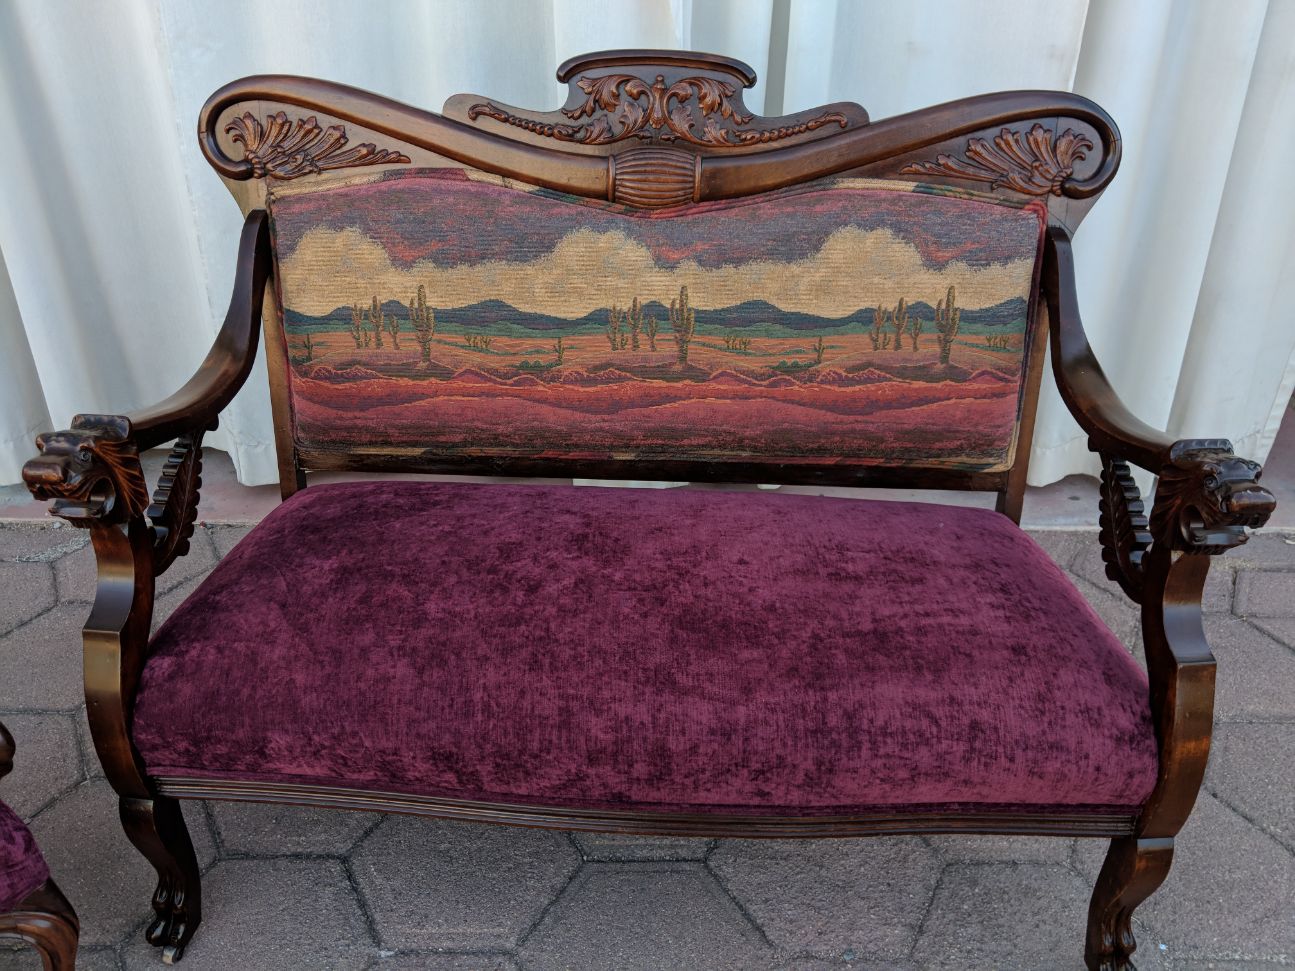 Authentic Southwest Fabric upholstered love seat